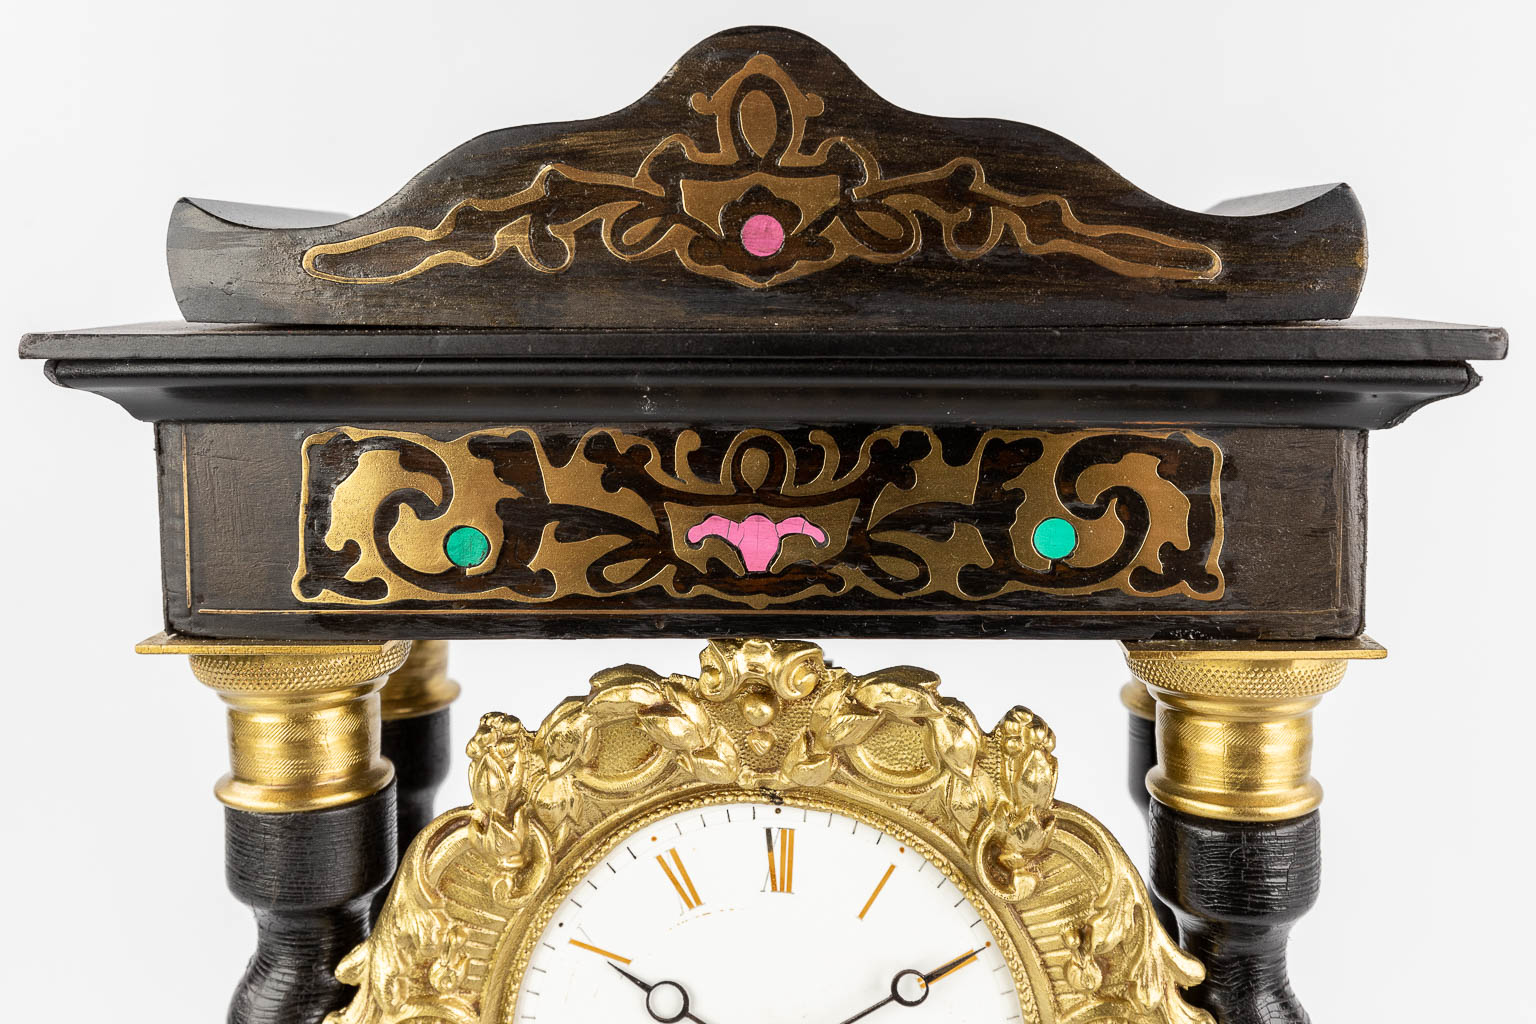 A column clock finished with copper inlay in Napoleon 3 style. 19th C. (L: 14 x W: 25 x H: 48 cm)